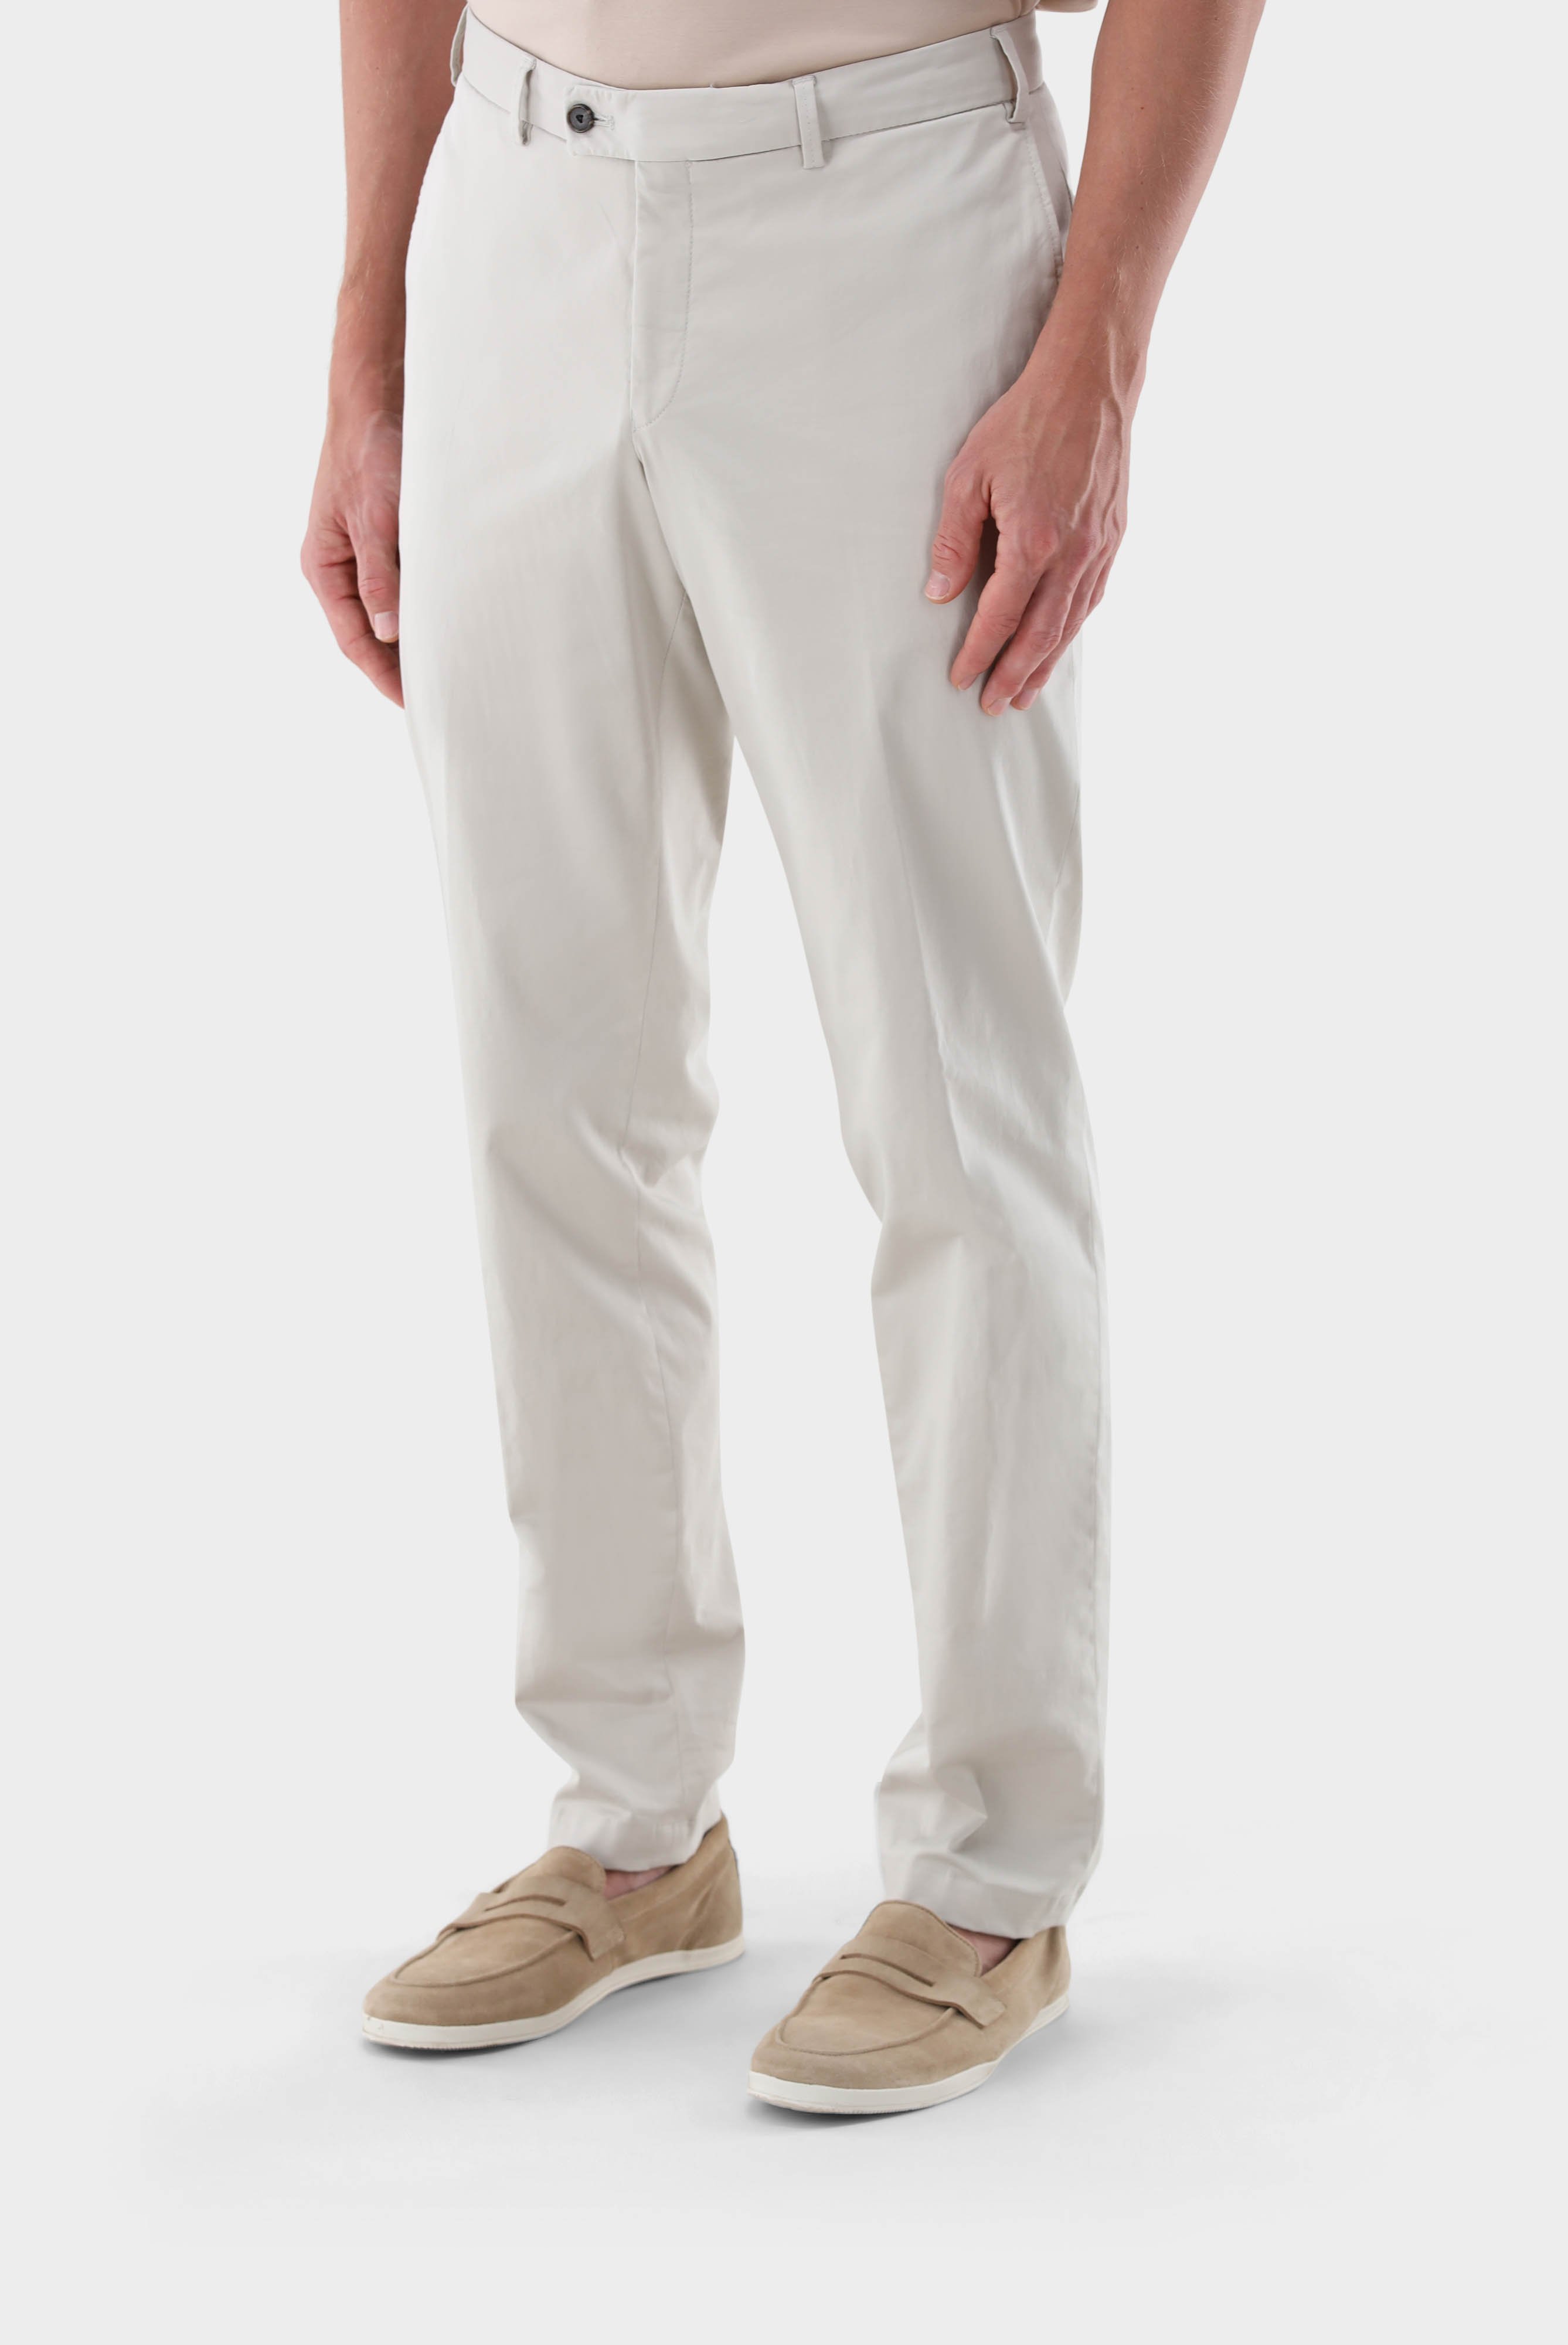 Jeans & Trousers+Cotton with Stretch Tapered Chinos+80.7858..J00151.110.48